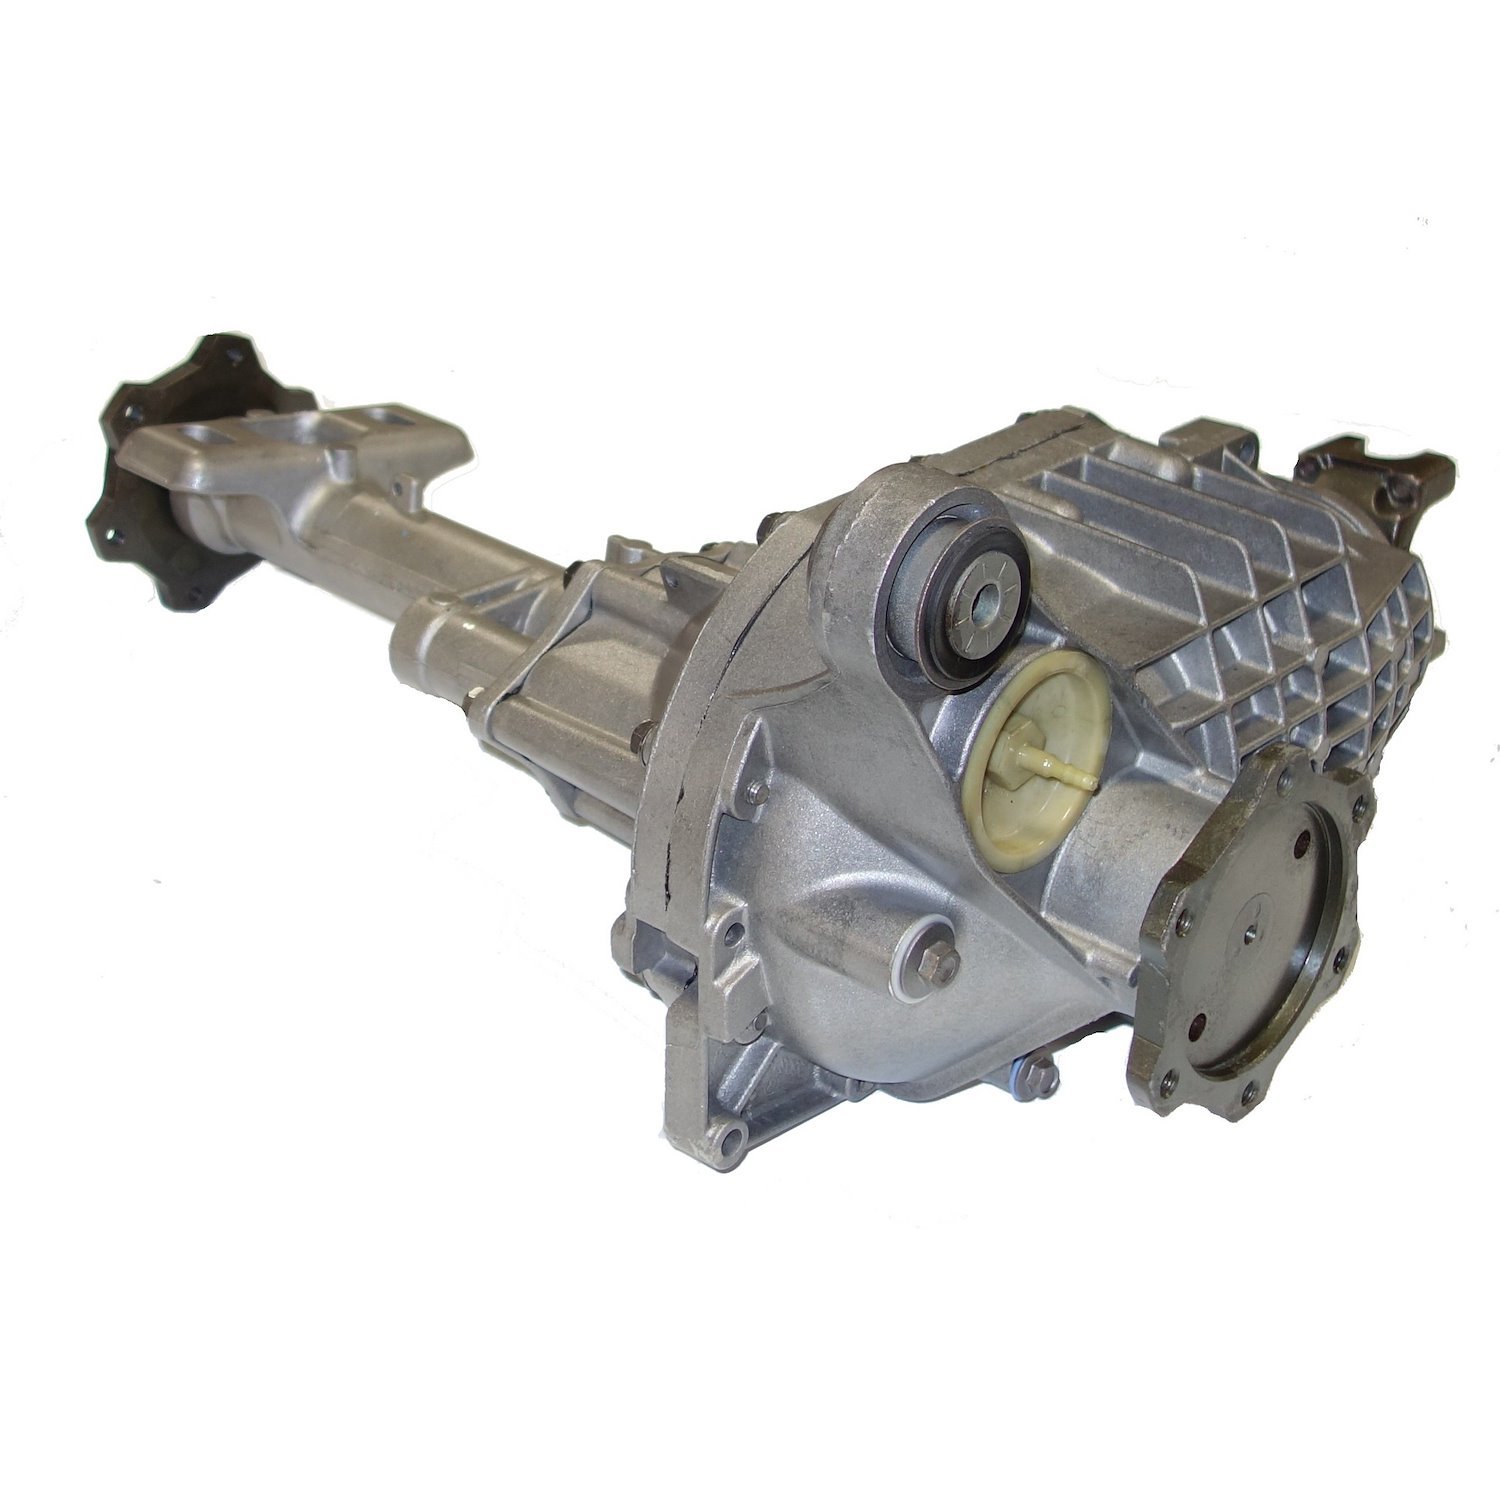 Remanufactured Axle Assembly for GM 8.25" 99-06 GM 3.73 Ratio with Disc